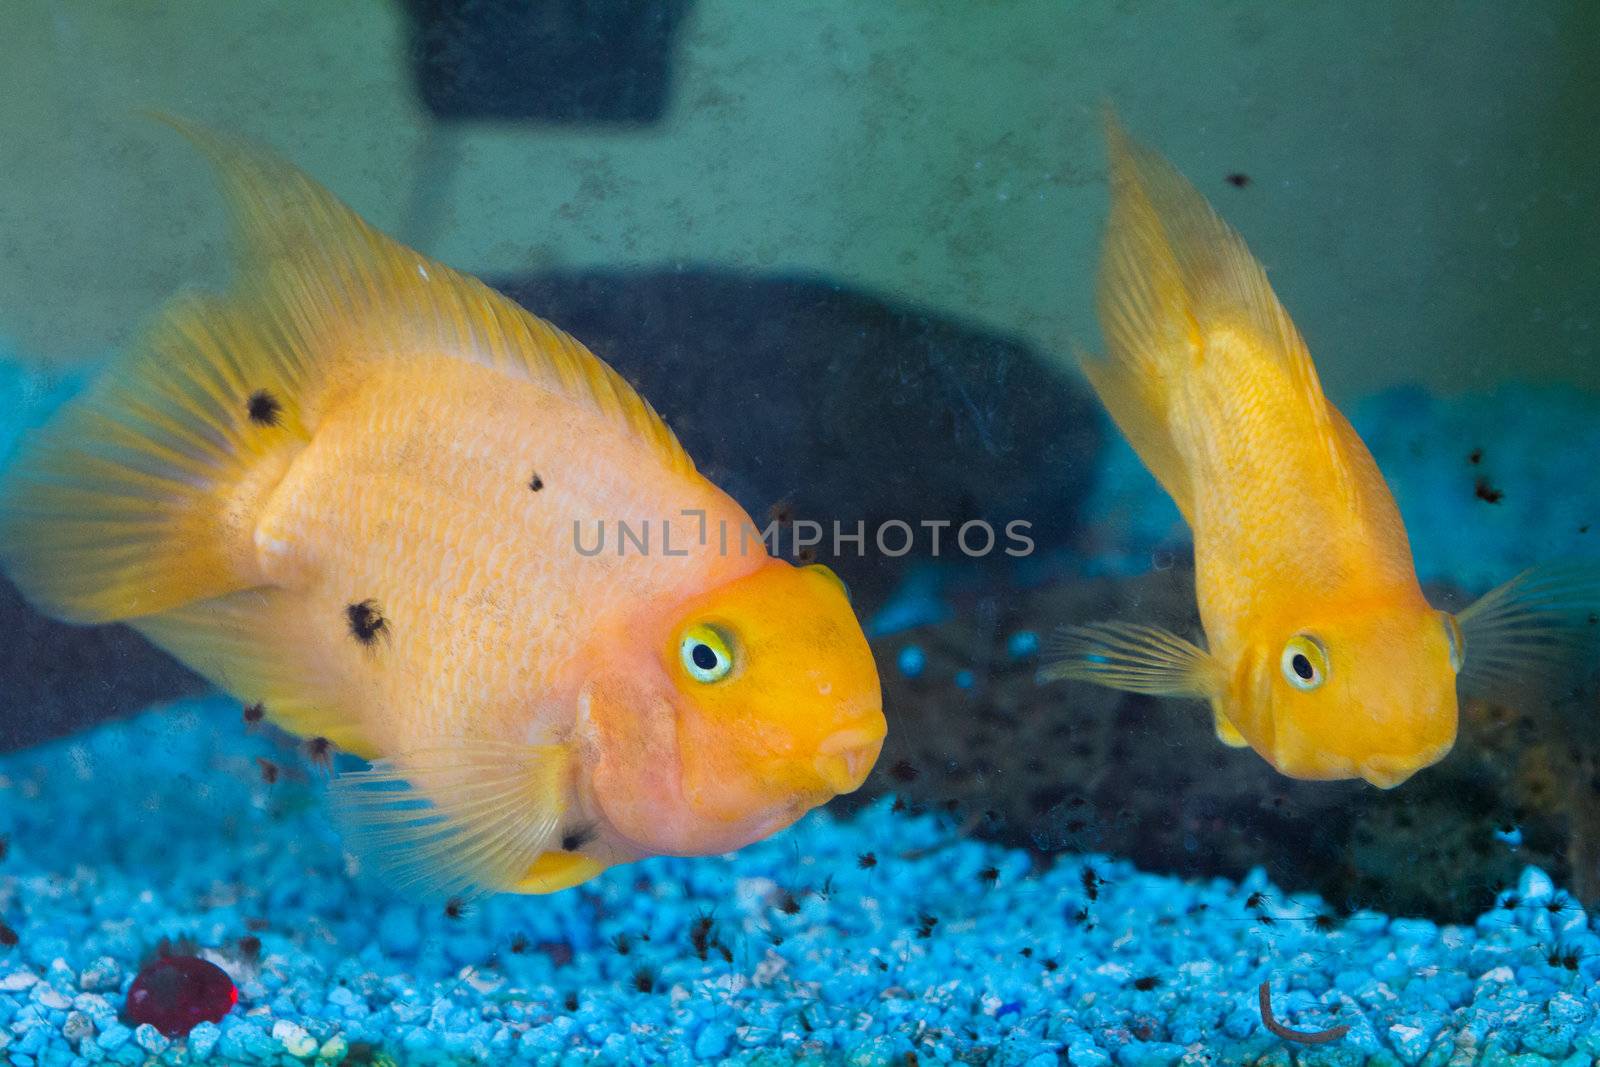 Some gold fish swim in an aquarium and look towards the camera while underwater.